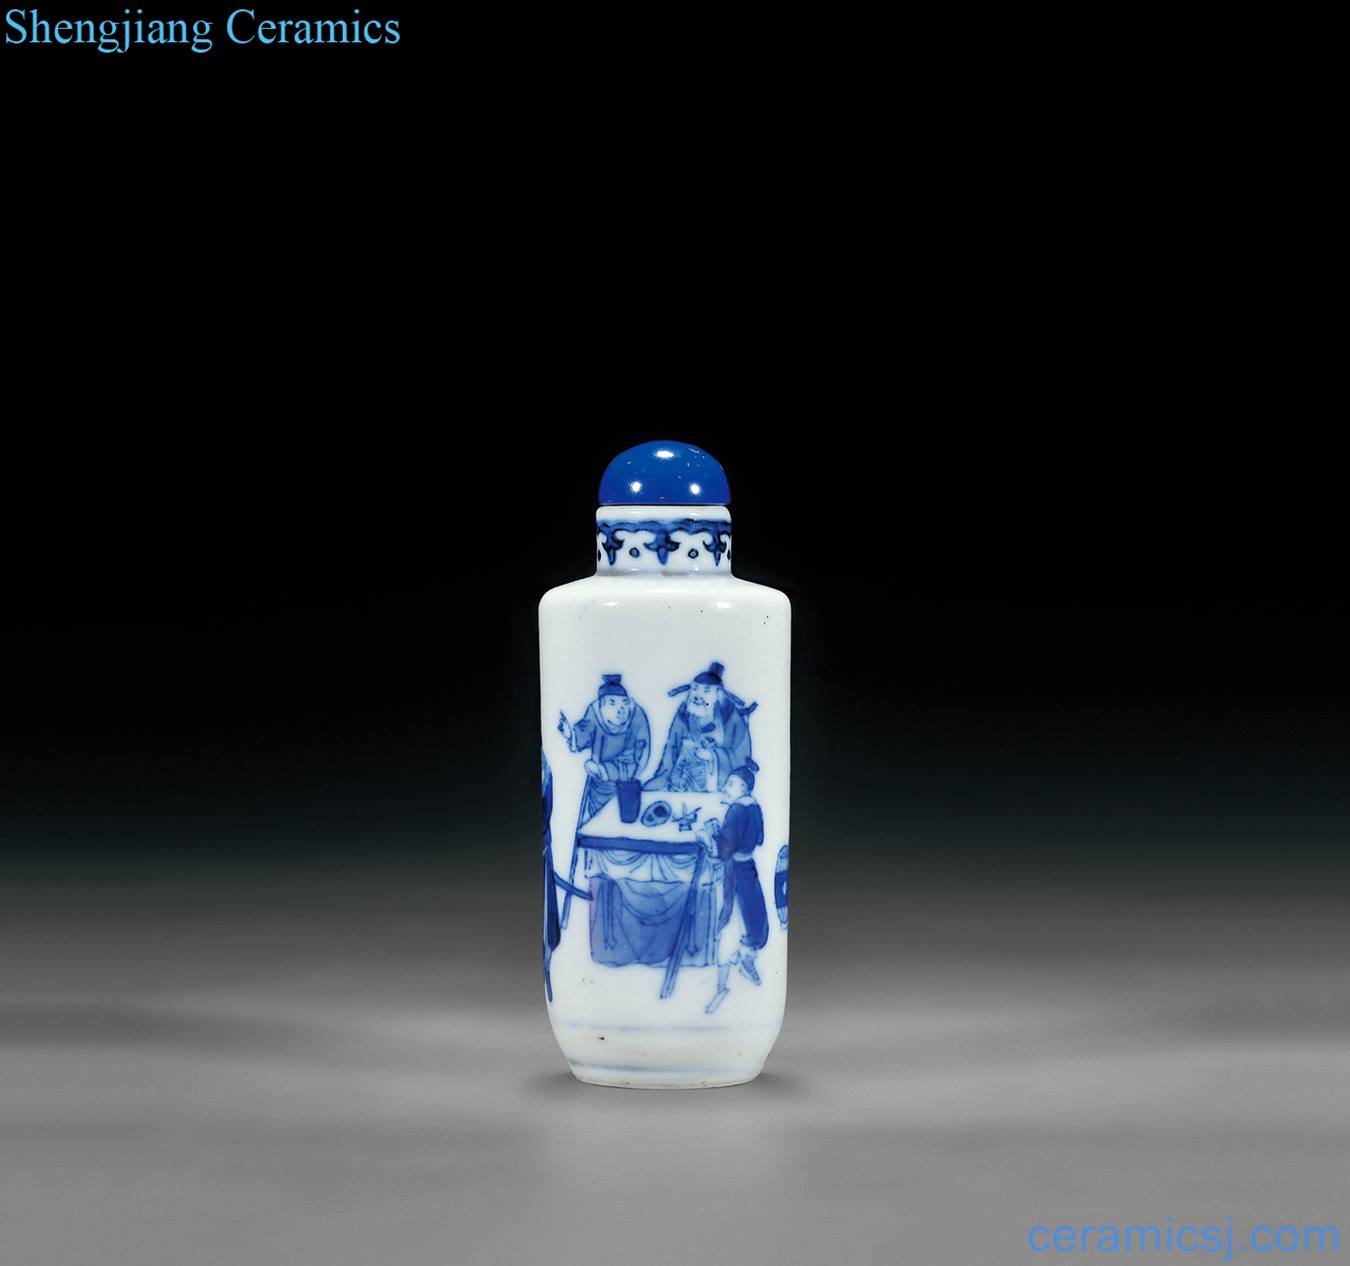 Qing grain pipes of blue and white characters